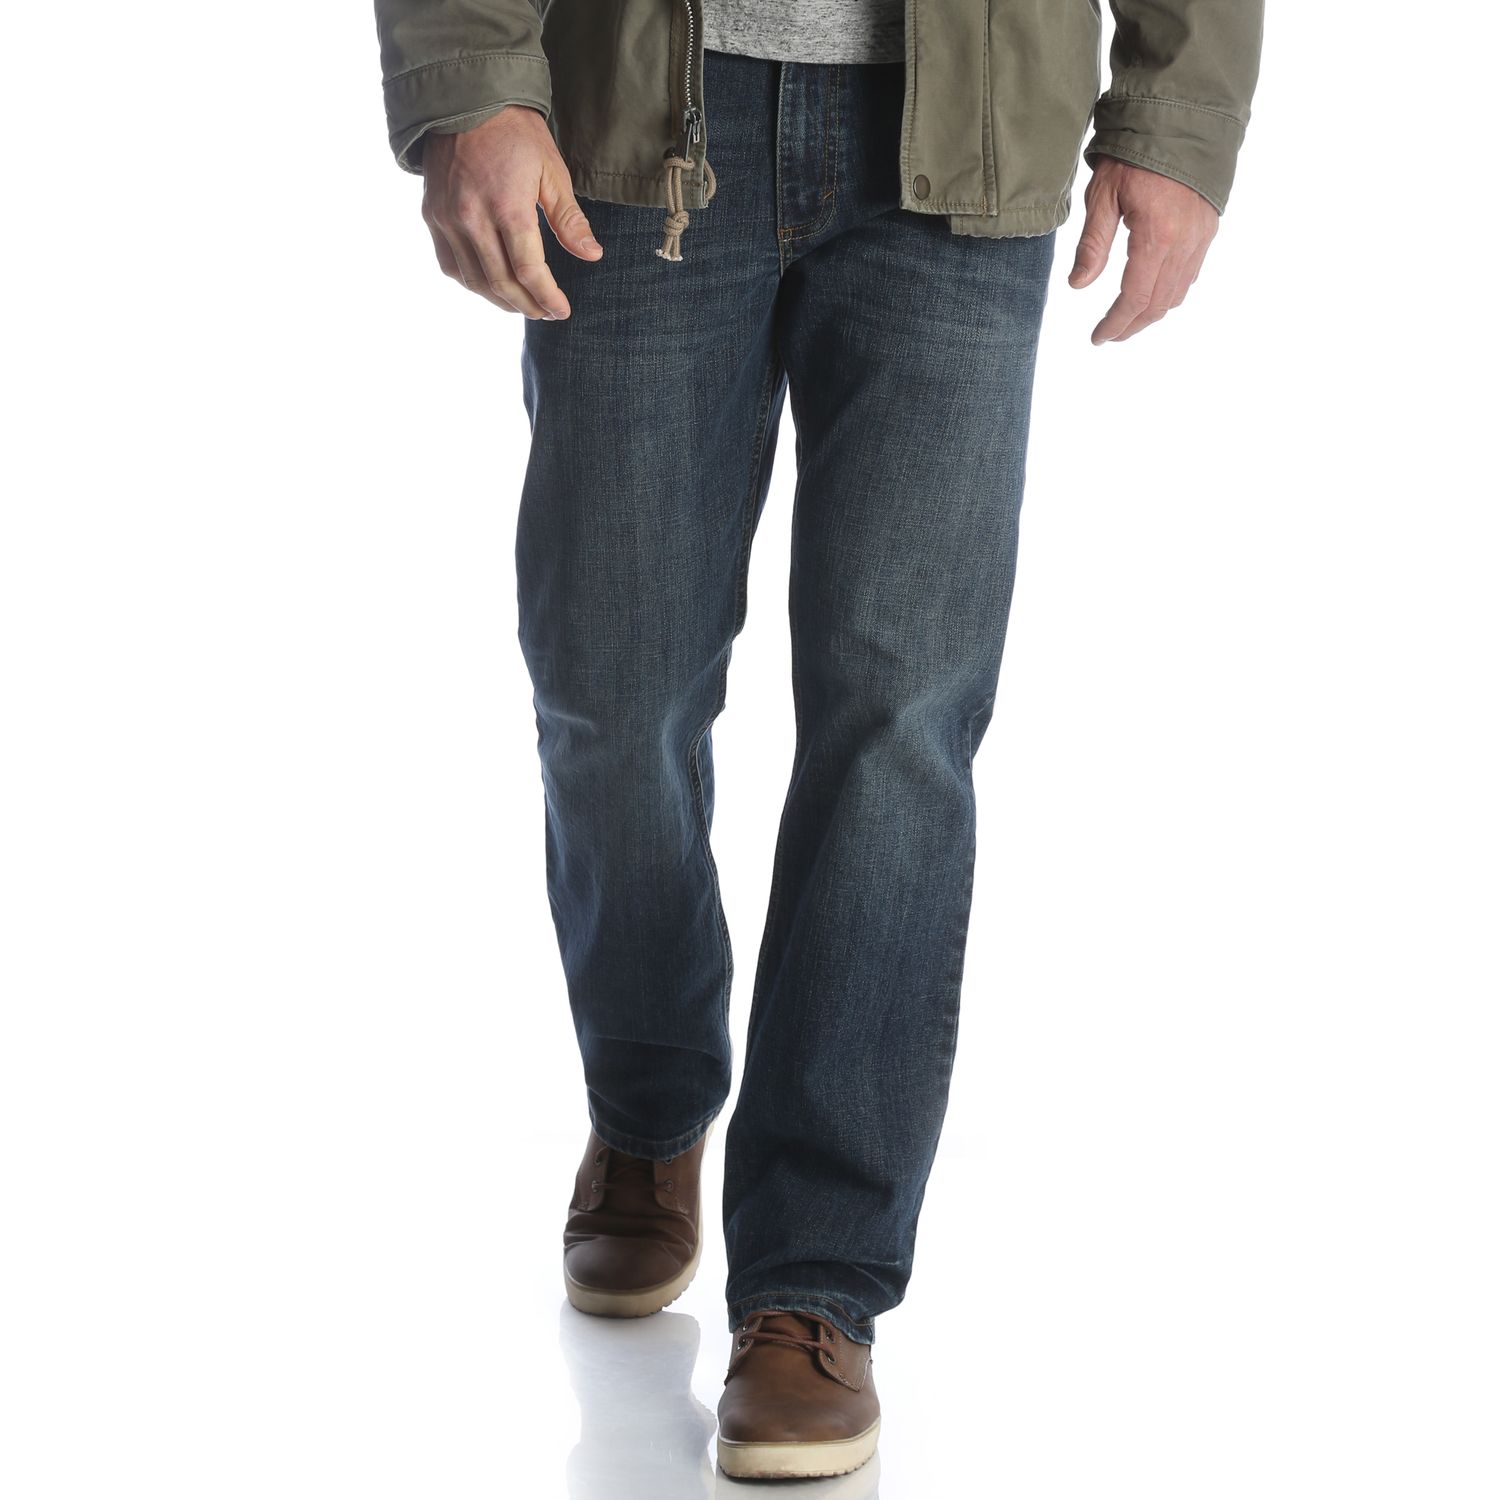 relaxed fit wrangler jeans mens